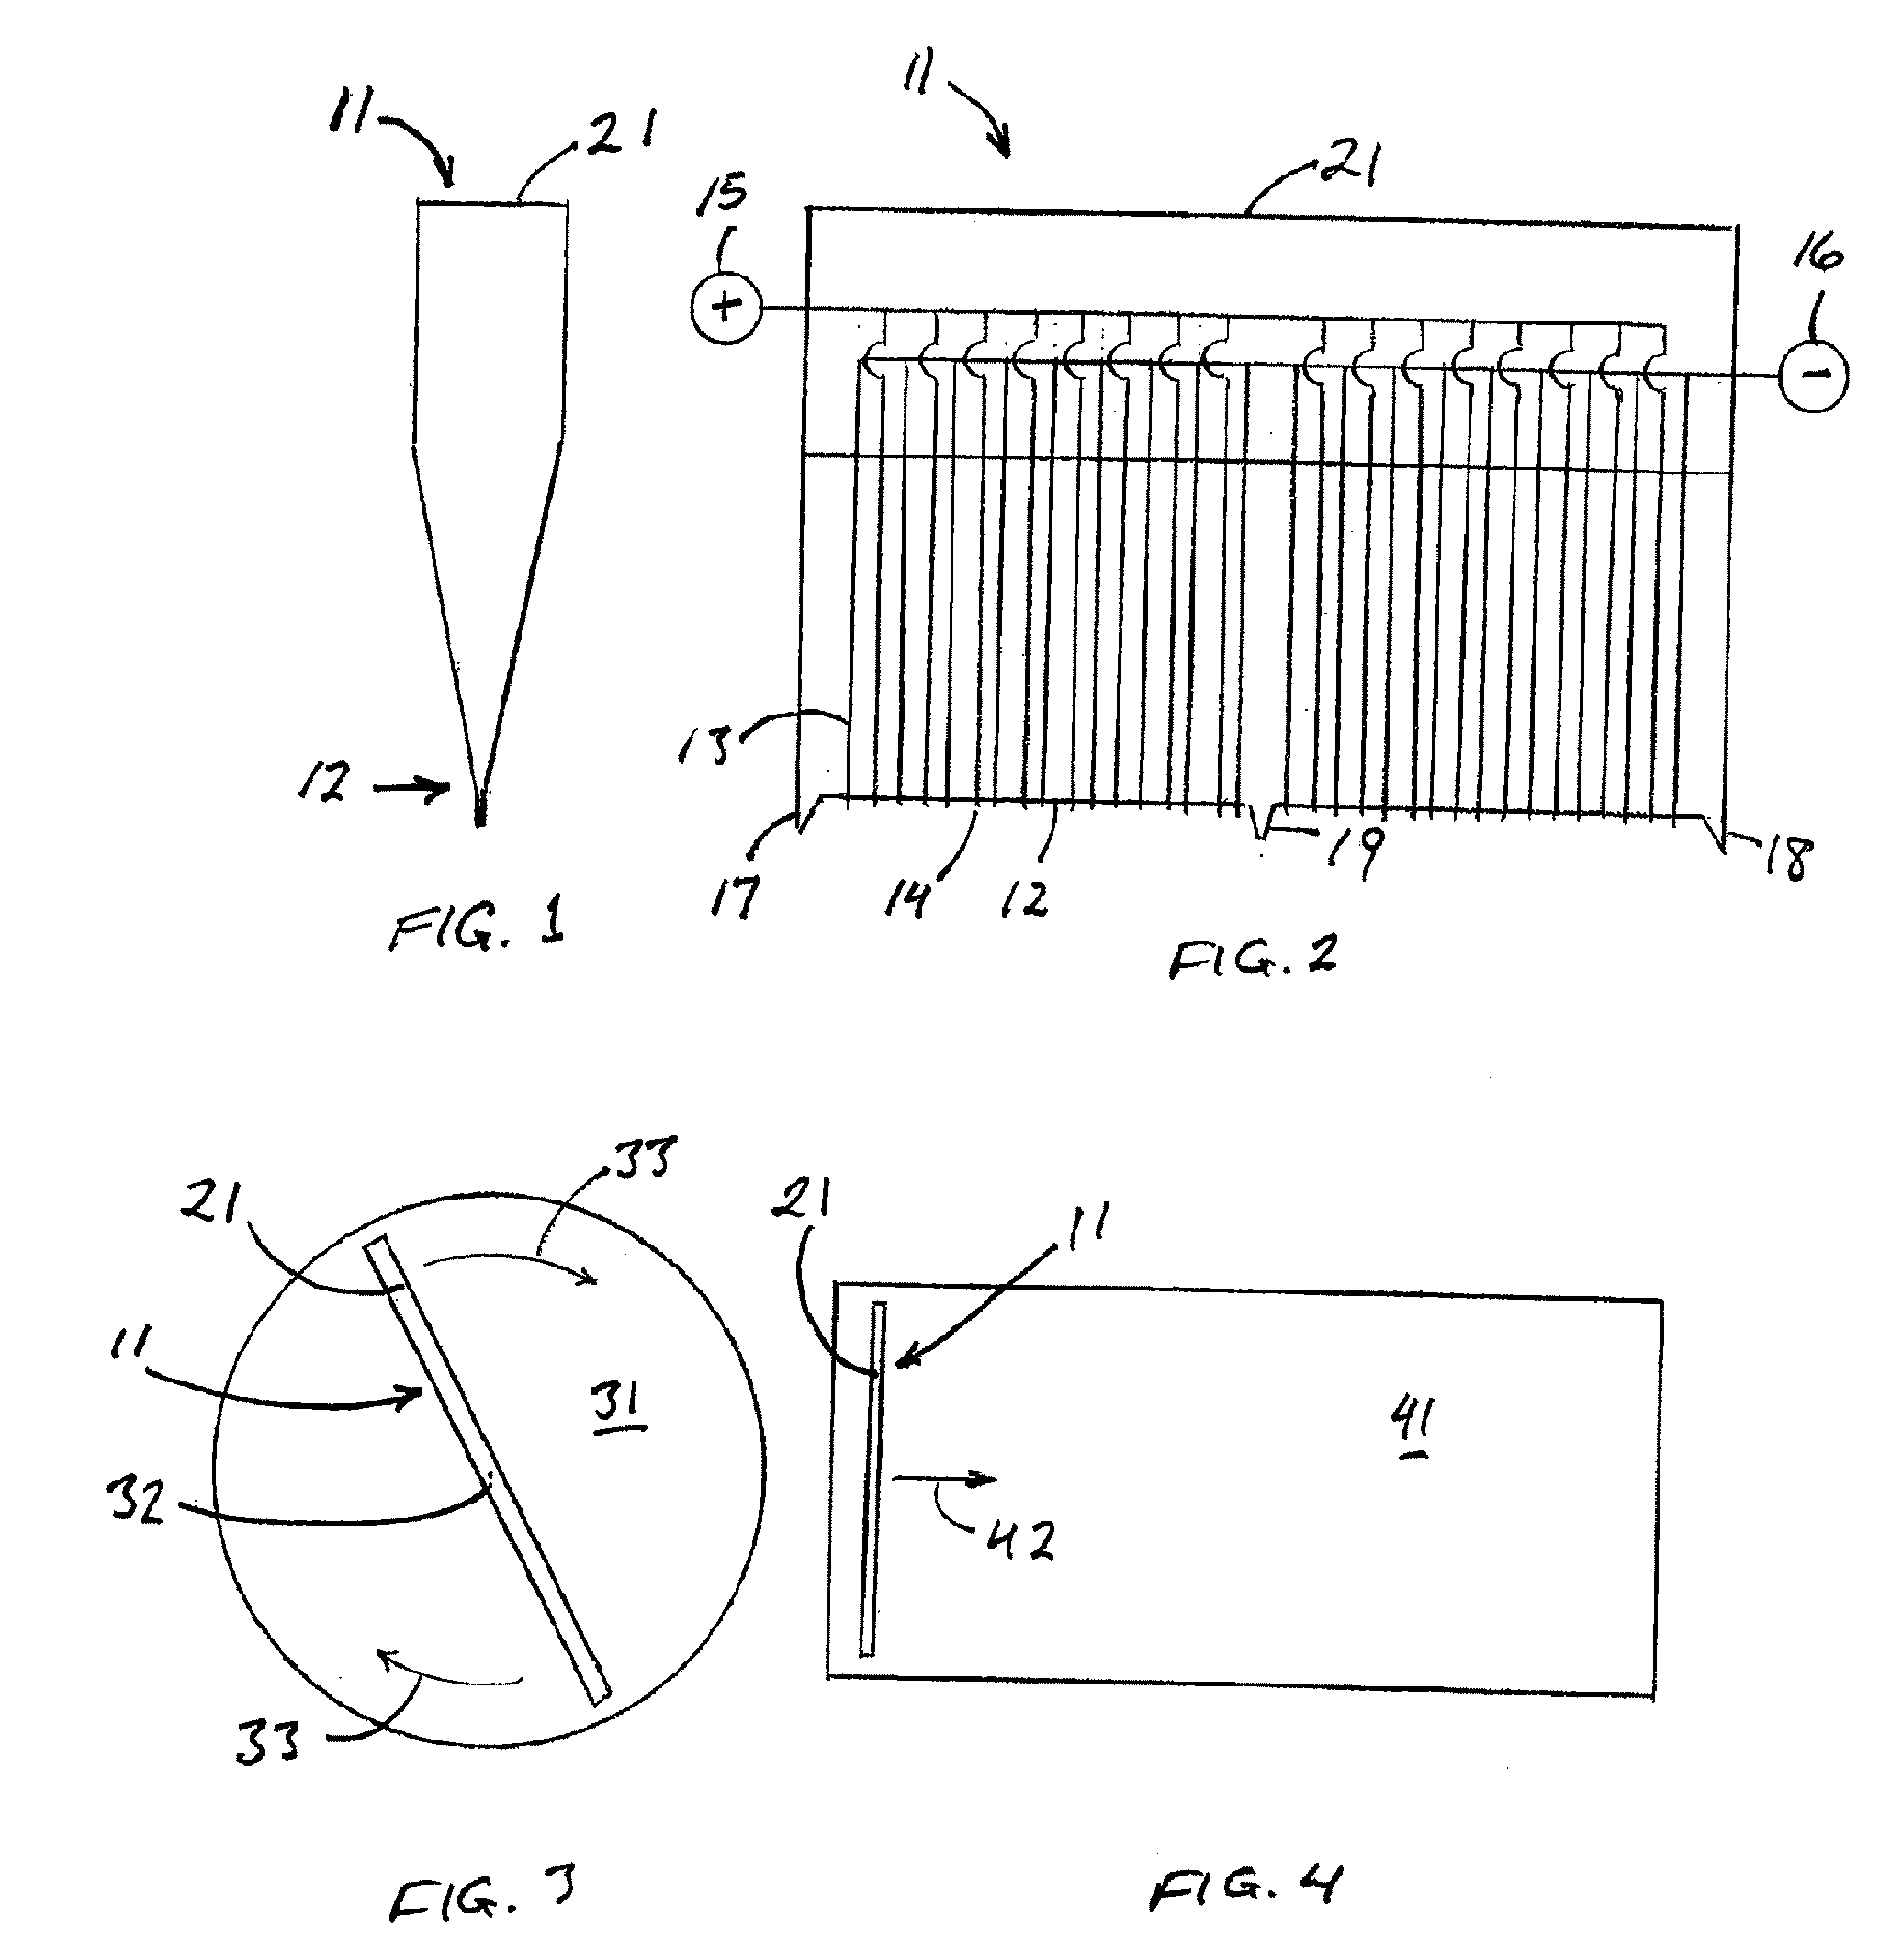 Electroporation of adherent cells with an array of closely spaced electrodes